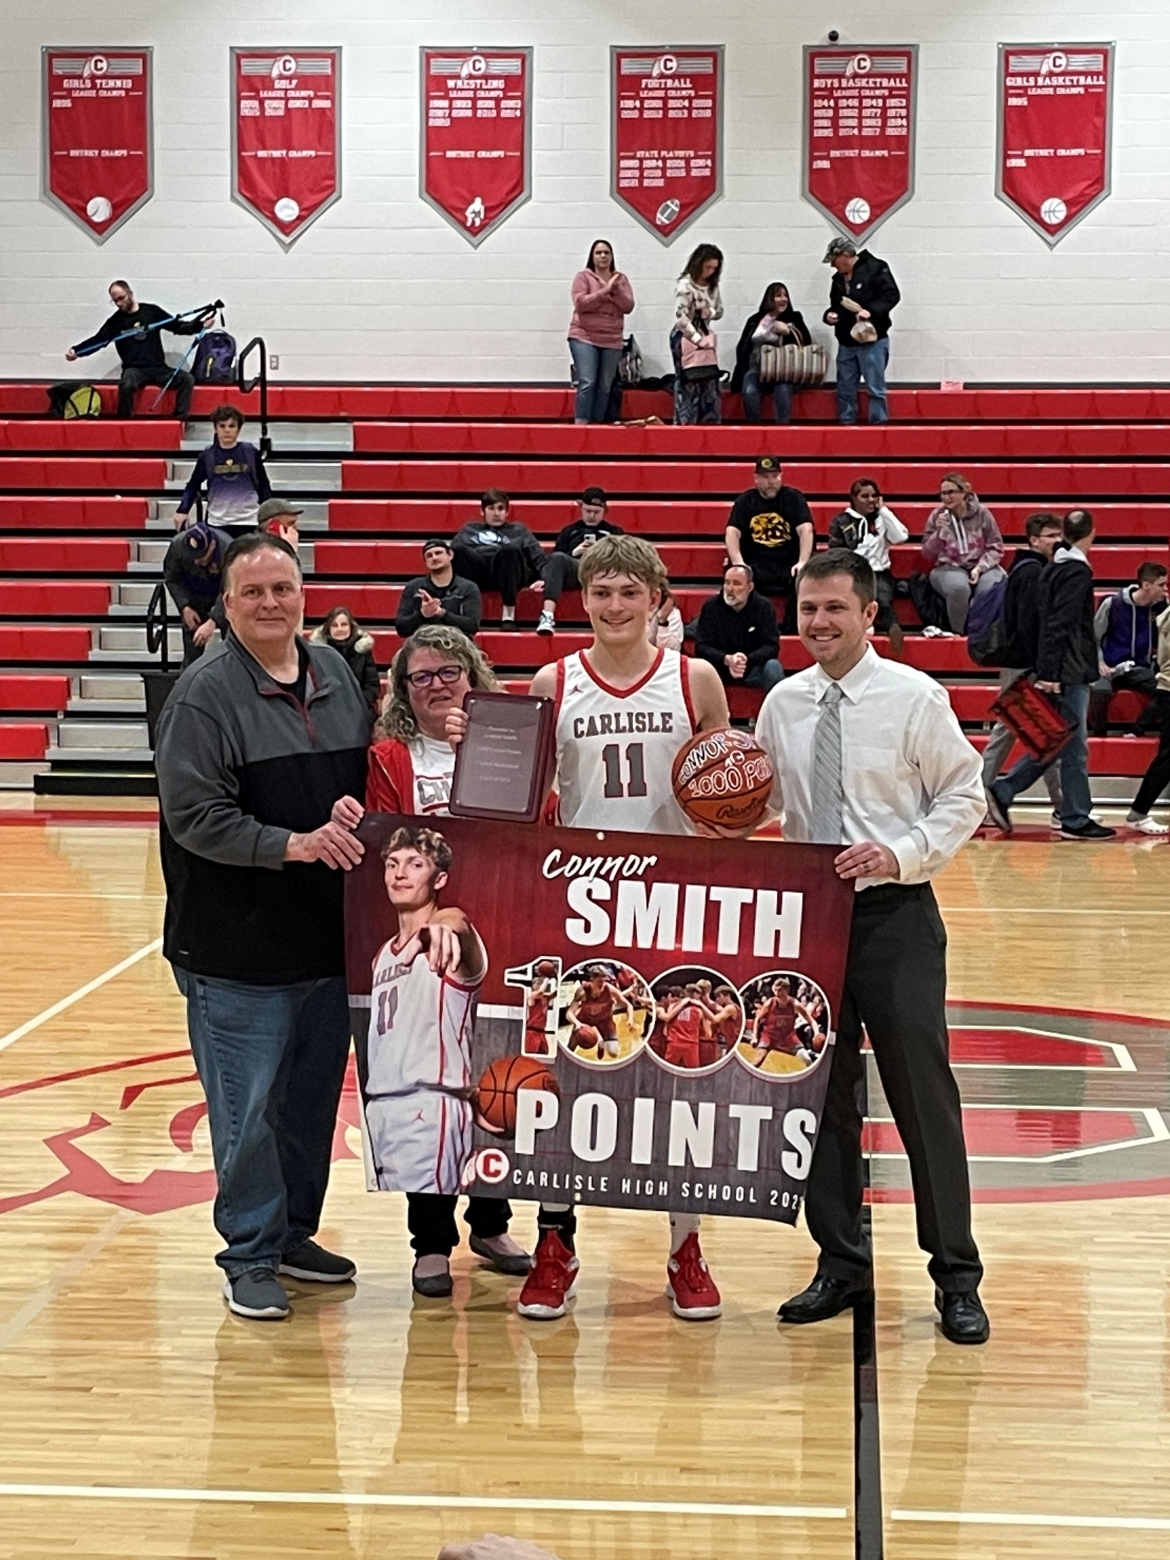 Connor Smith Hits 1000 Points!